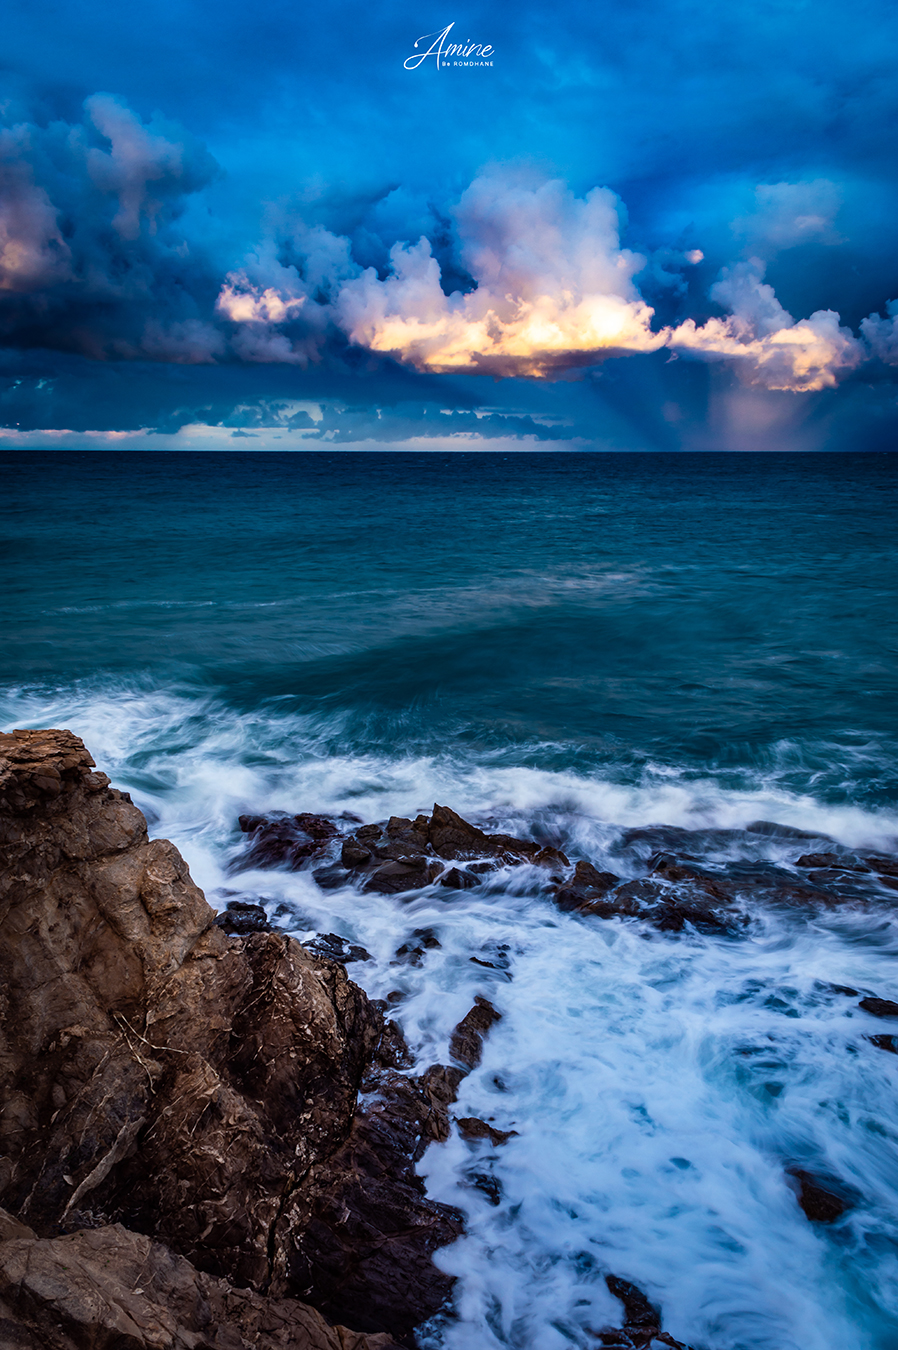 Dramatic sunset over Cap Blanc cliff by Amine Be Romdhane